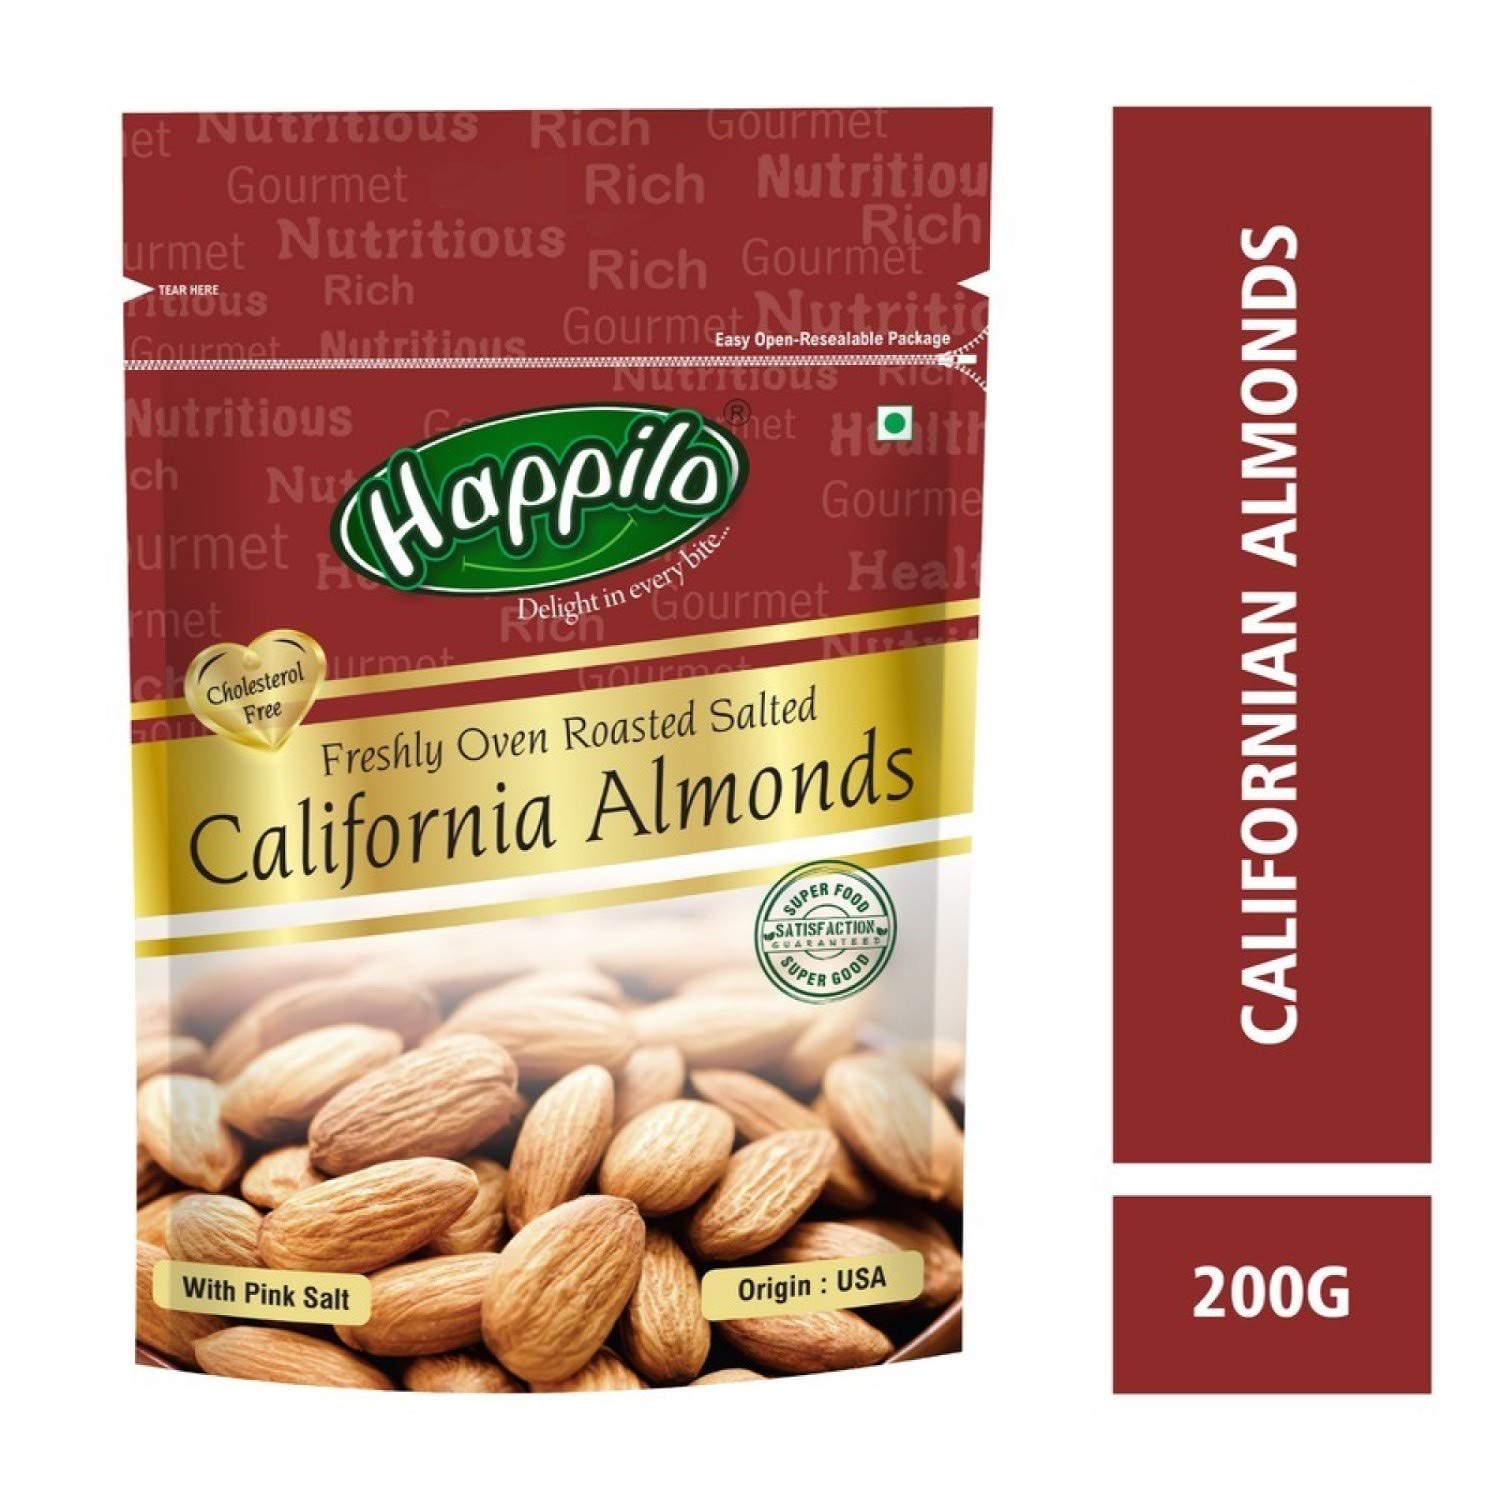 Californian Almonds Roasted & Salted